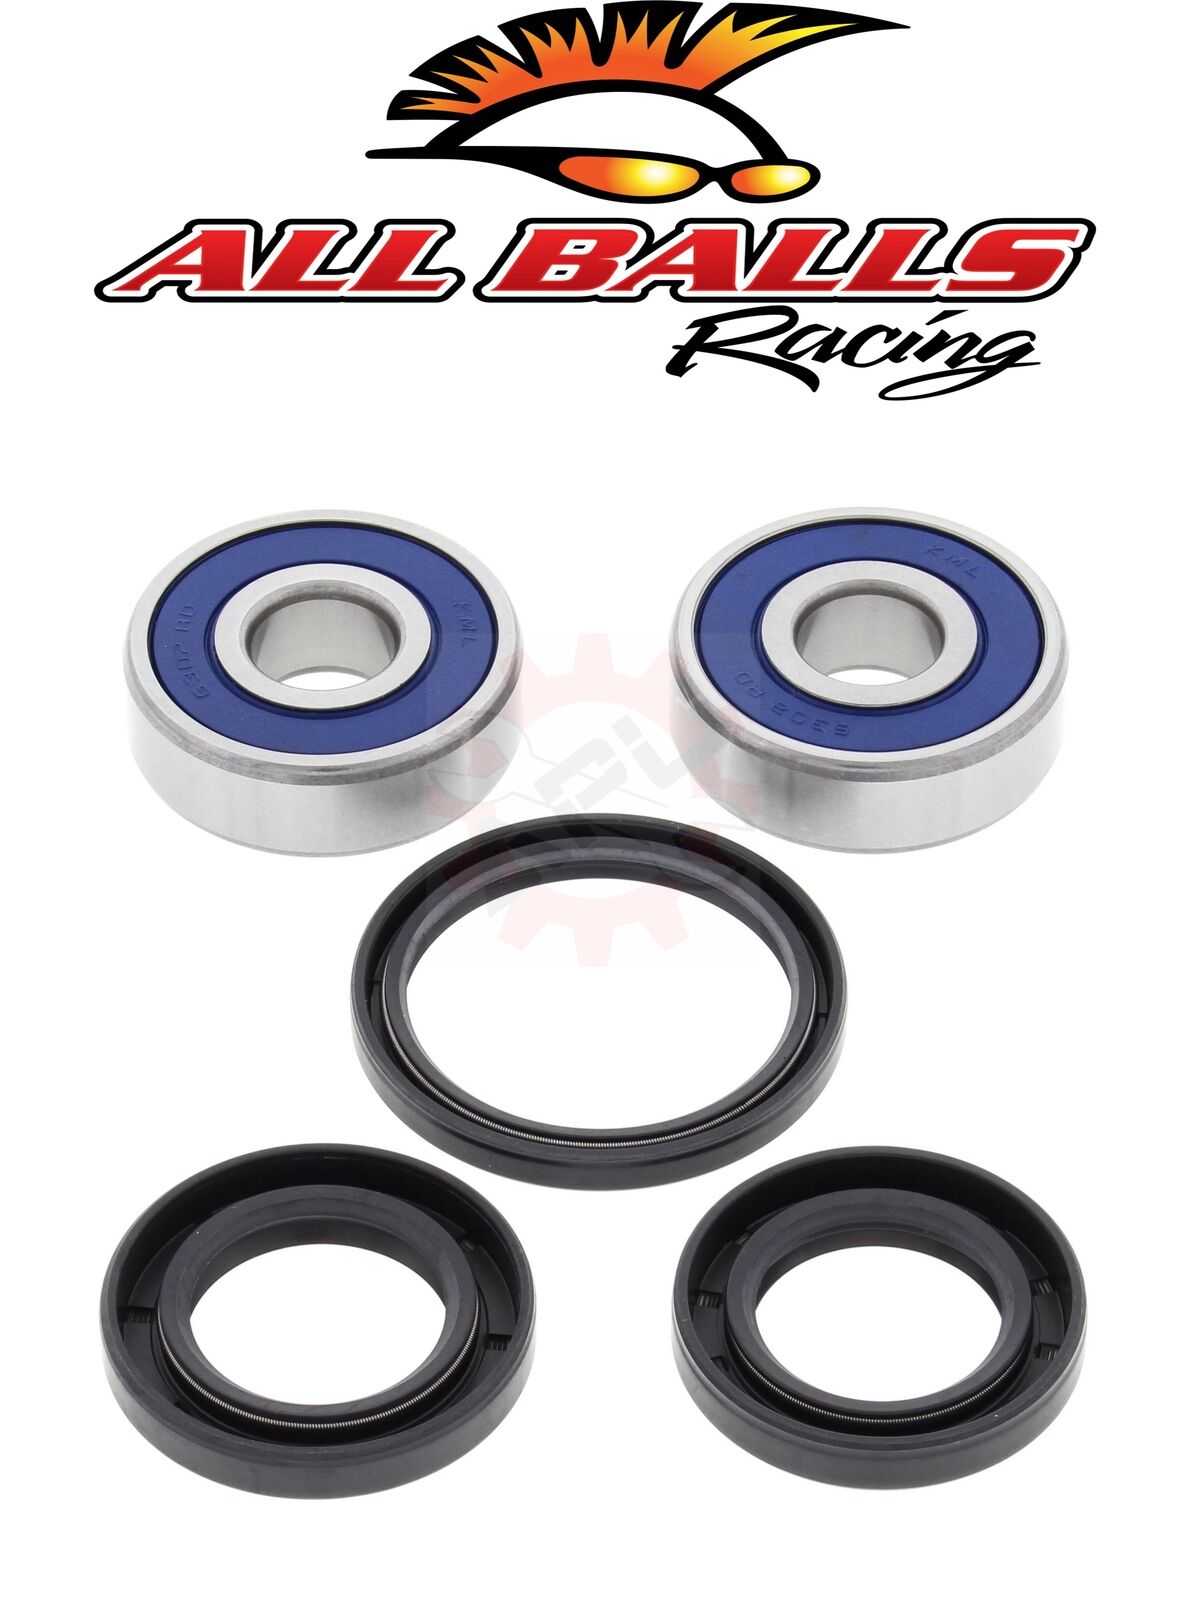 Front OR Rear Wheel Bearings CB/CL160 65-69 CM400 79-81 ALL BALLS